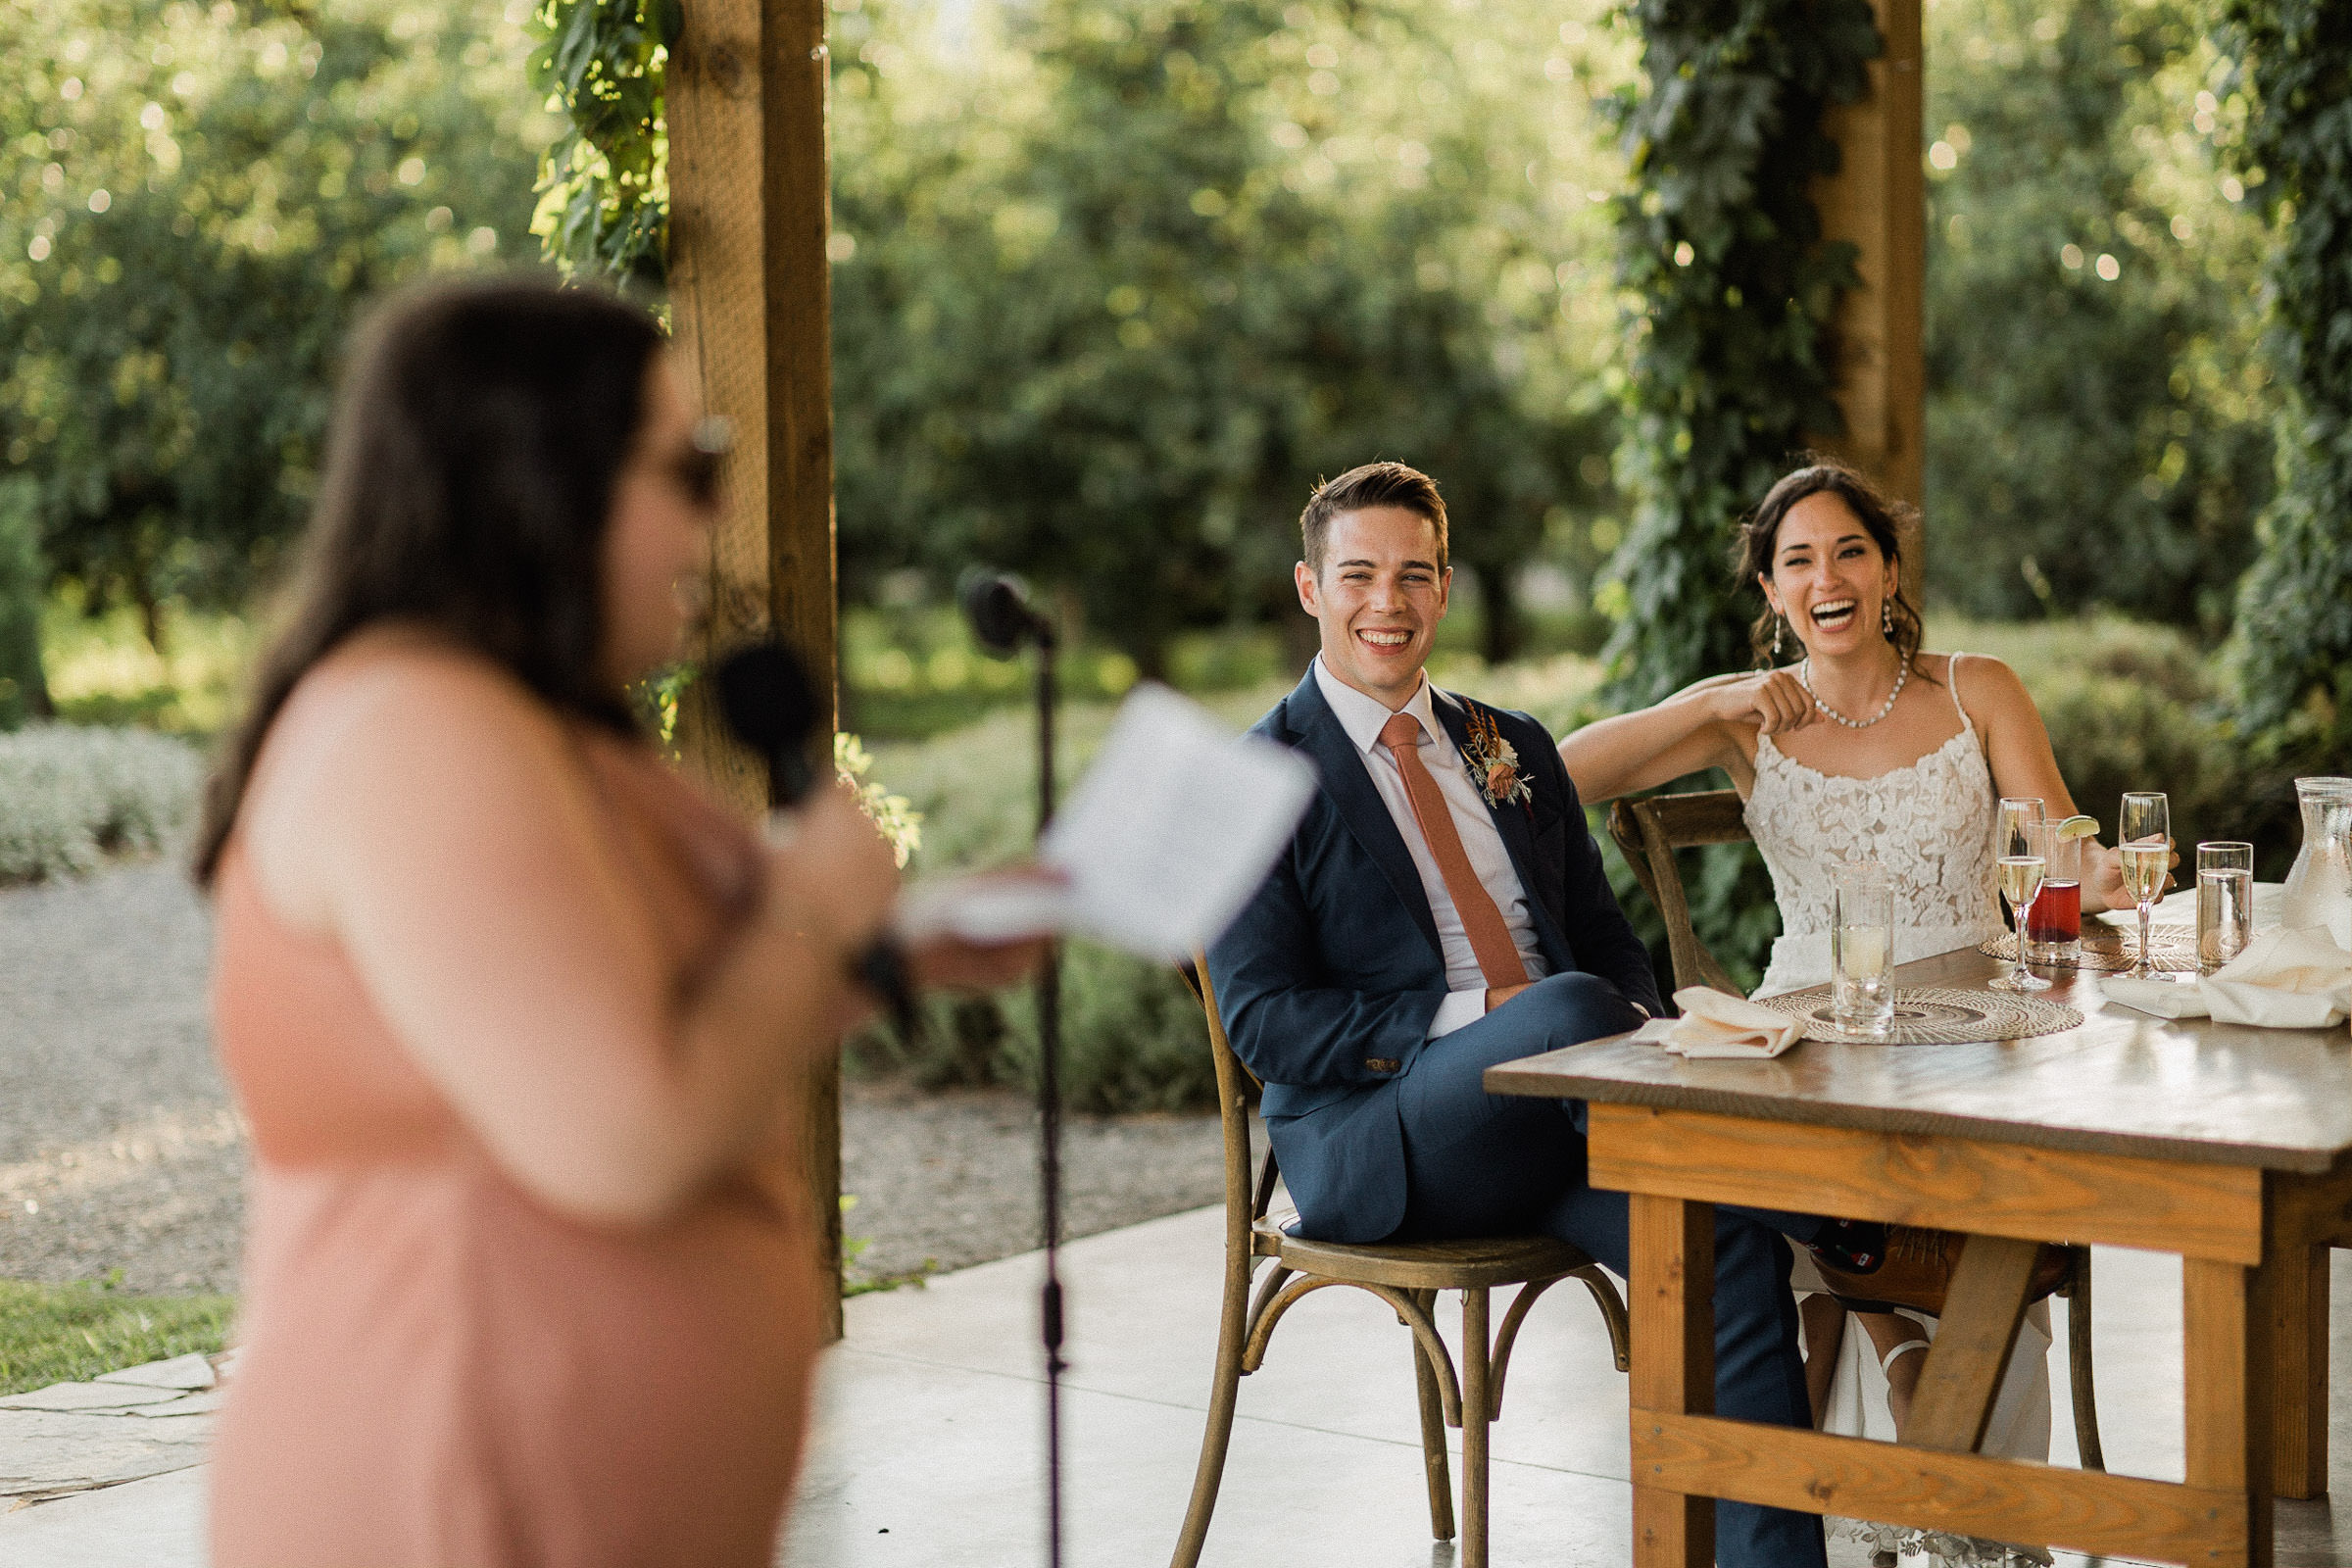 Maid of honor gives a toast as bride and groom laugh